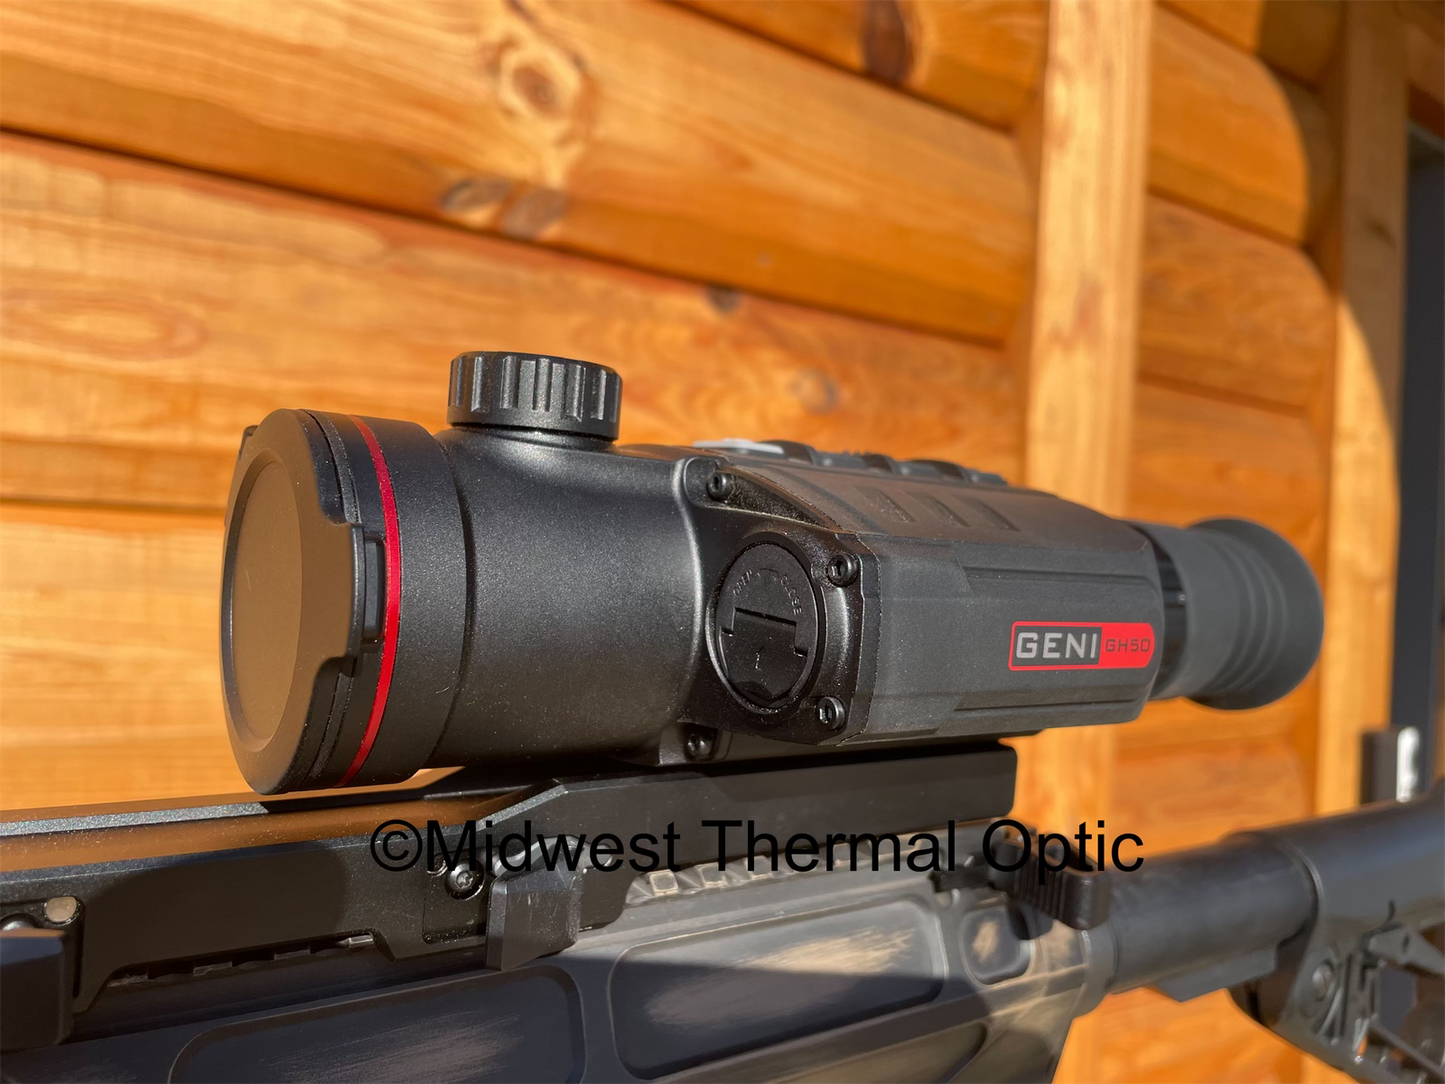 Demo InfiRay Outdoor Rico G Series 640 3X 50mm Thermal Scope (NON LRF)